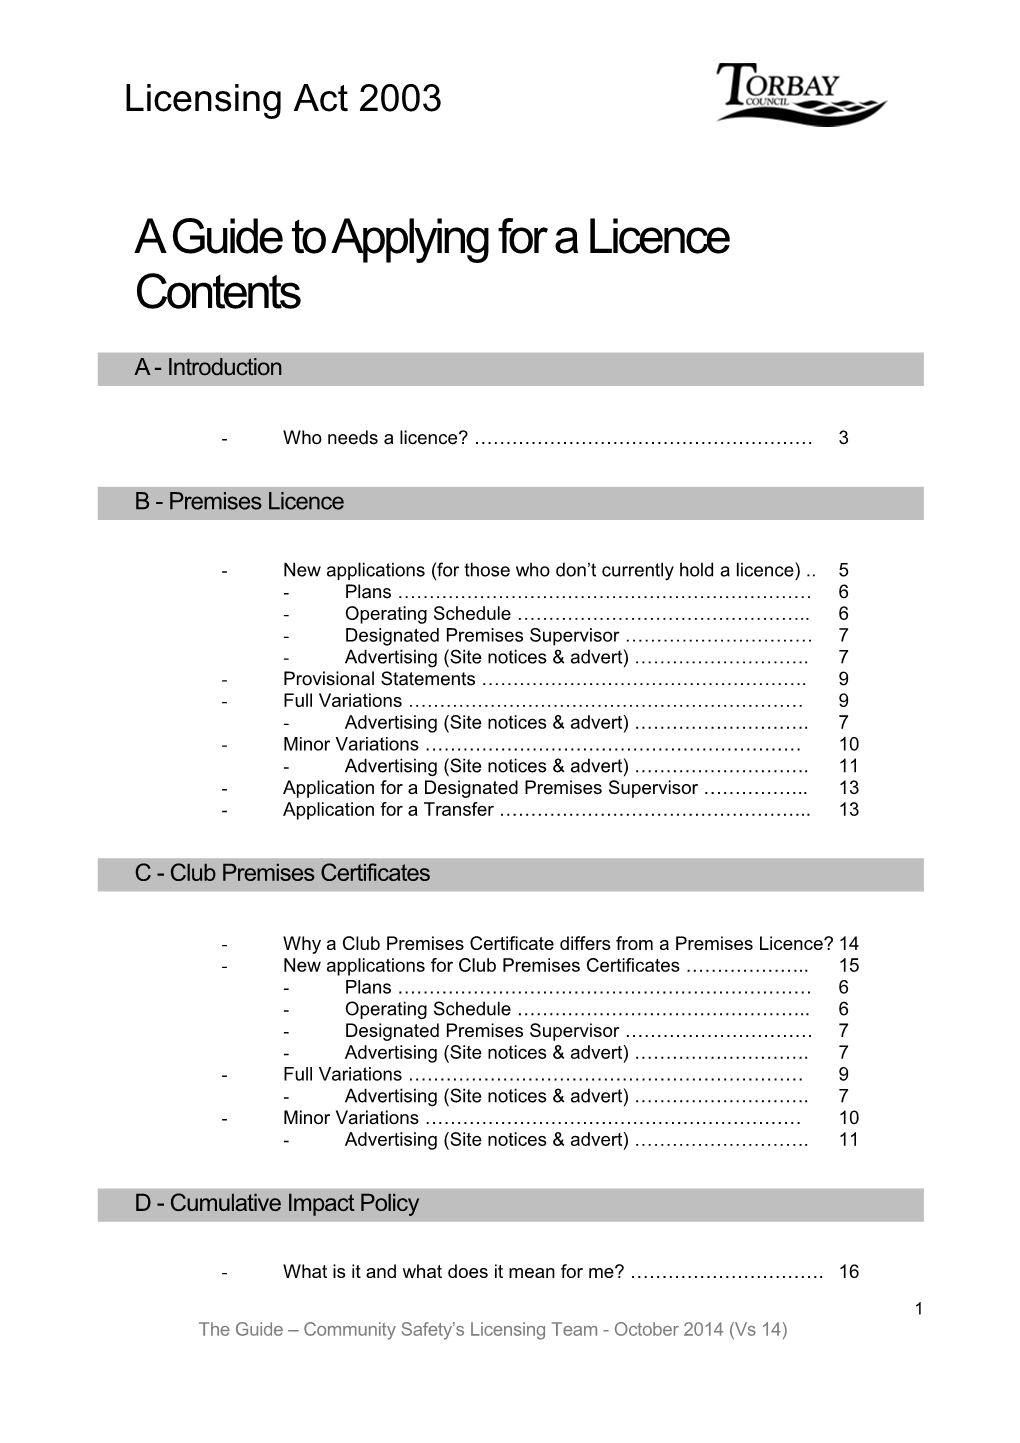 A Guide to Applying for a Licence Contents